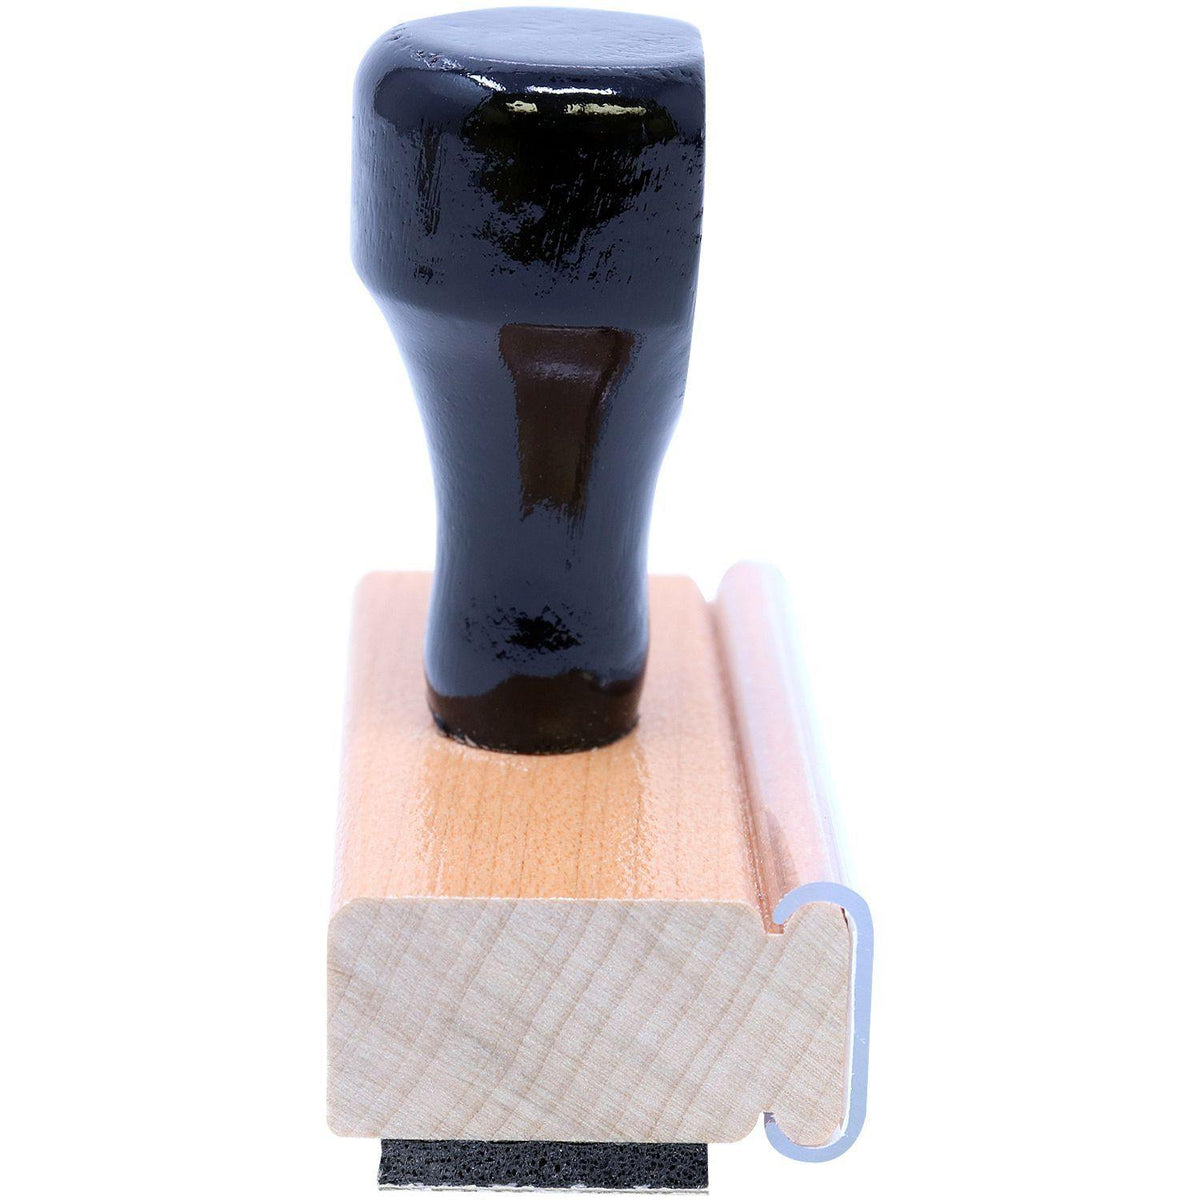 Side View of Large Muestra Rubber Stamp Alt 1